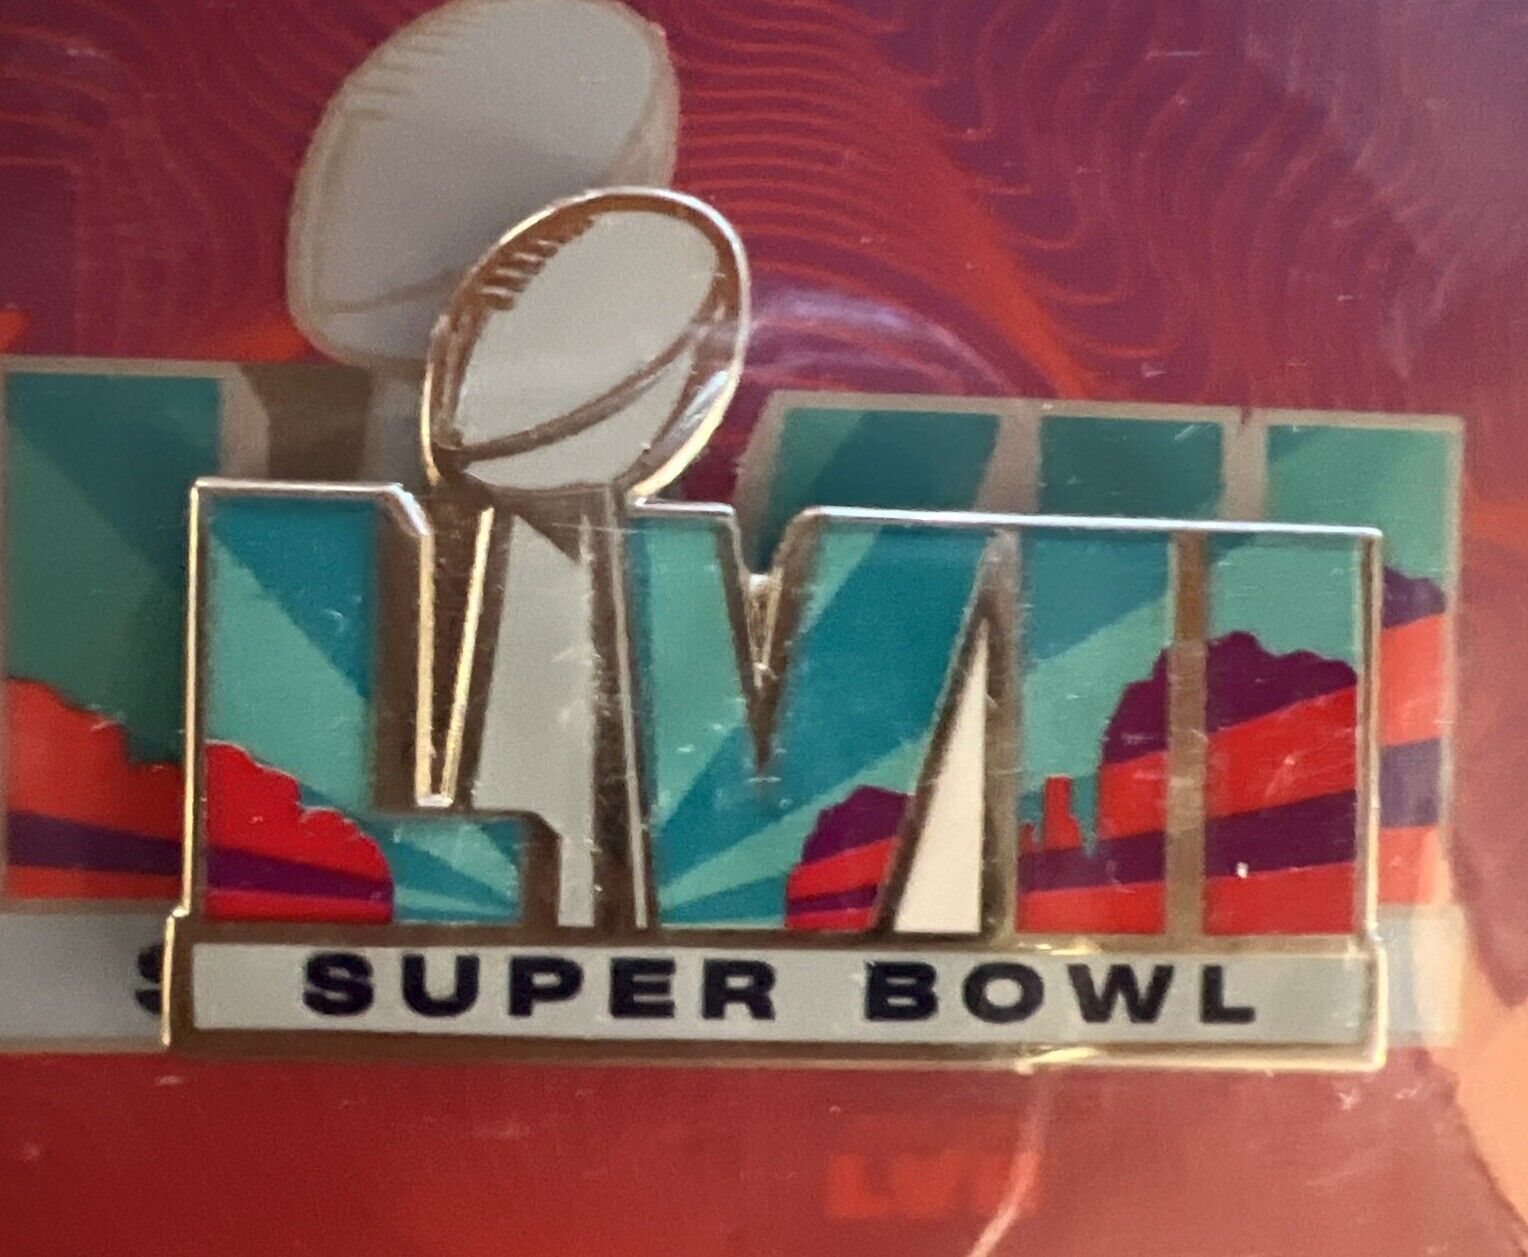 Super Bowl LVII 57 Lapel Pin New In Package FansFirst Brand Approx 1.5 Inches